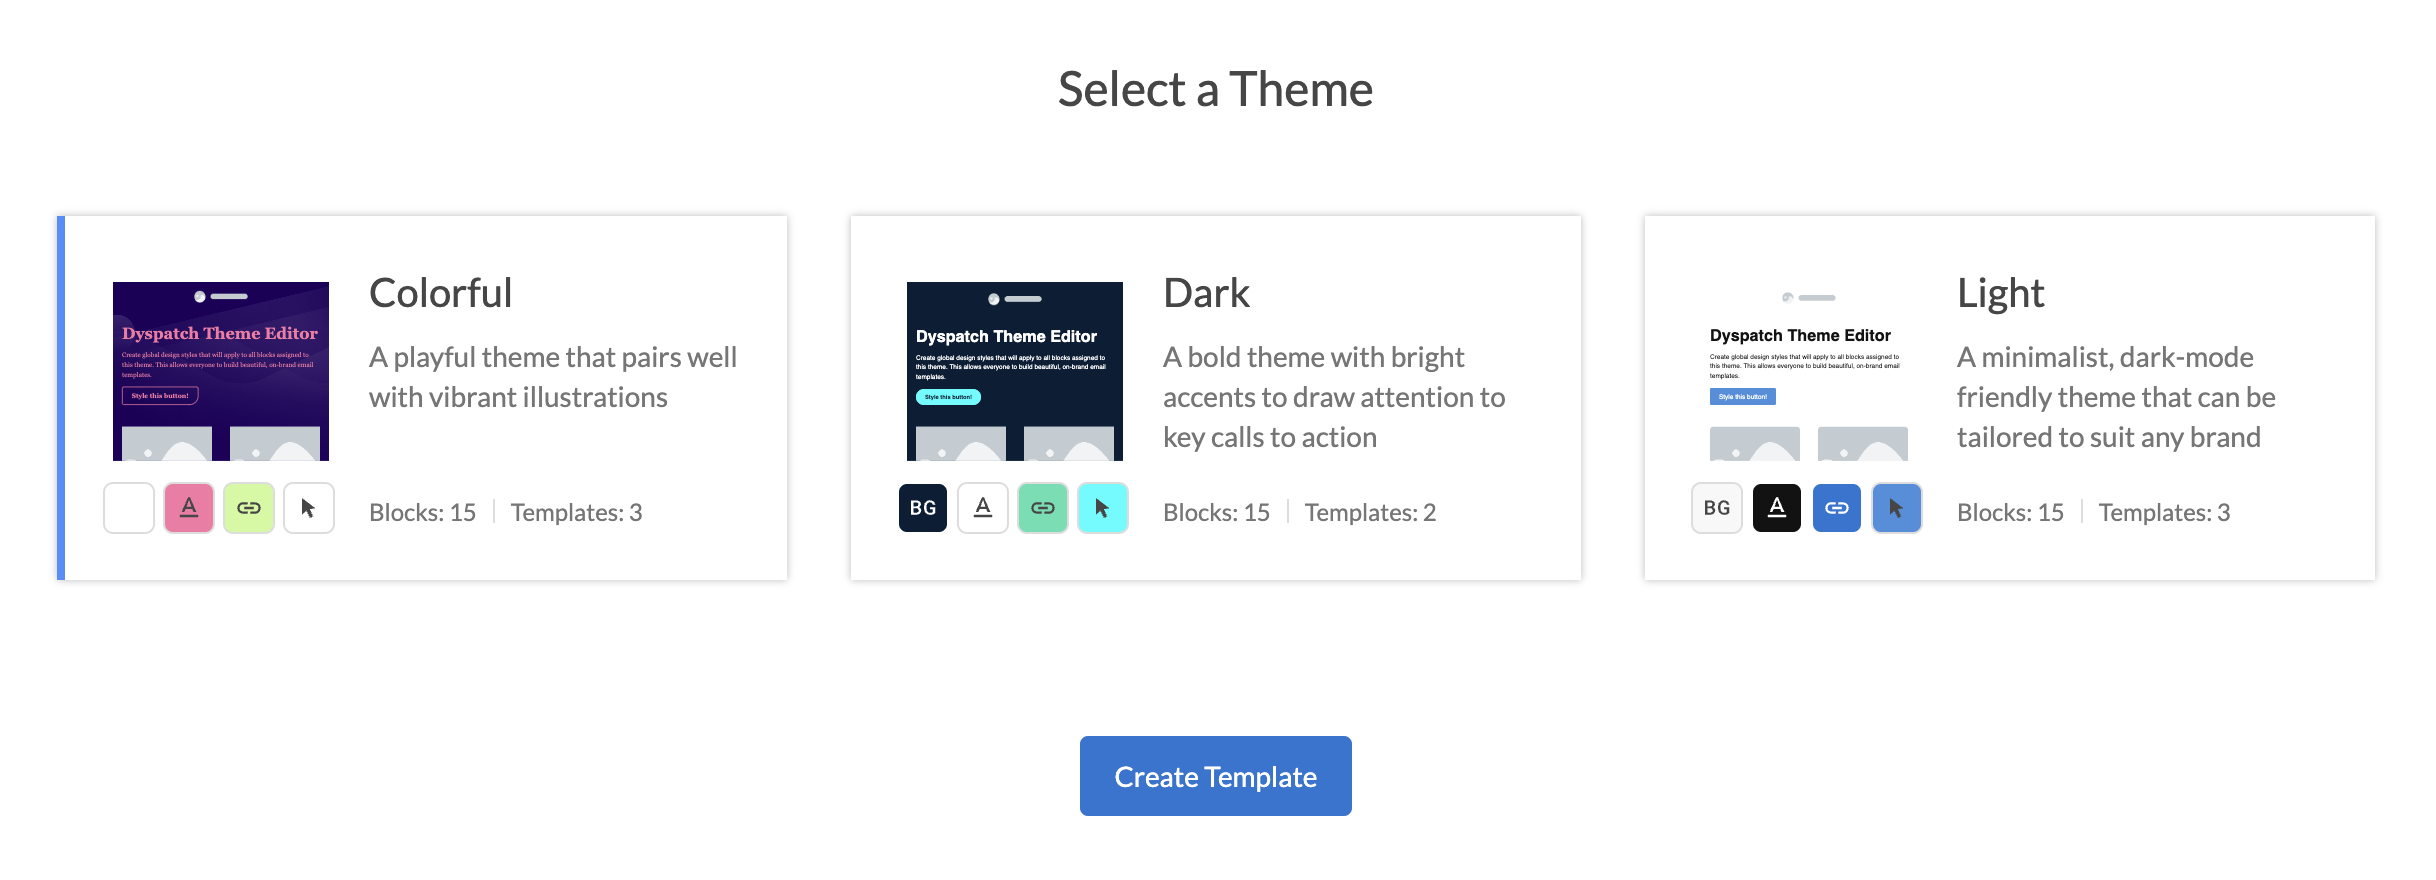 Selecting a theme while creating a new visual template